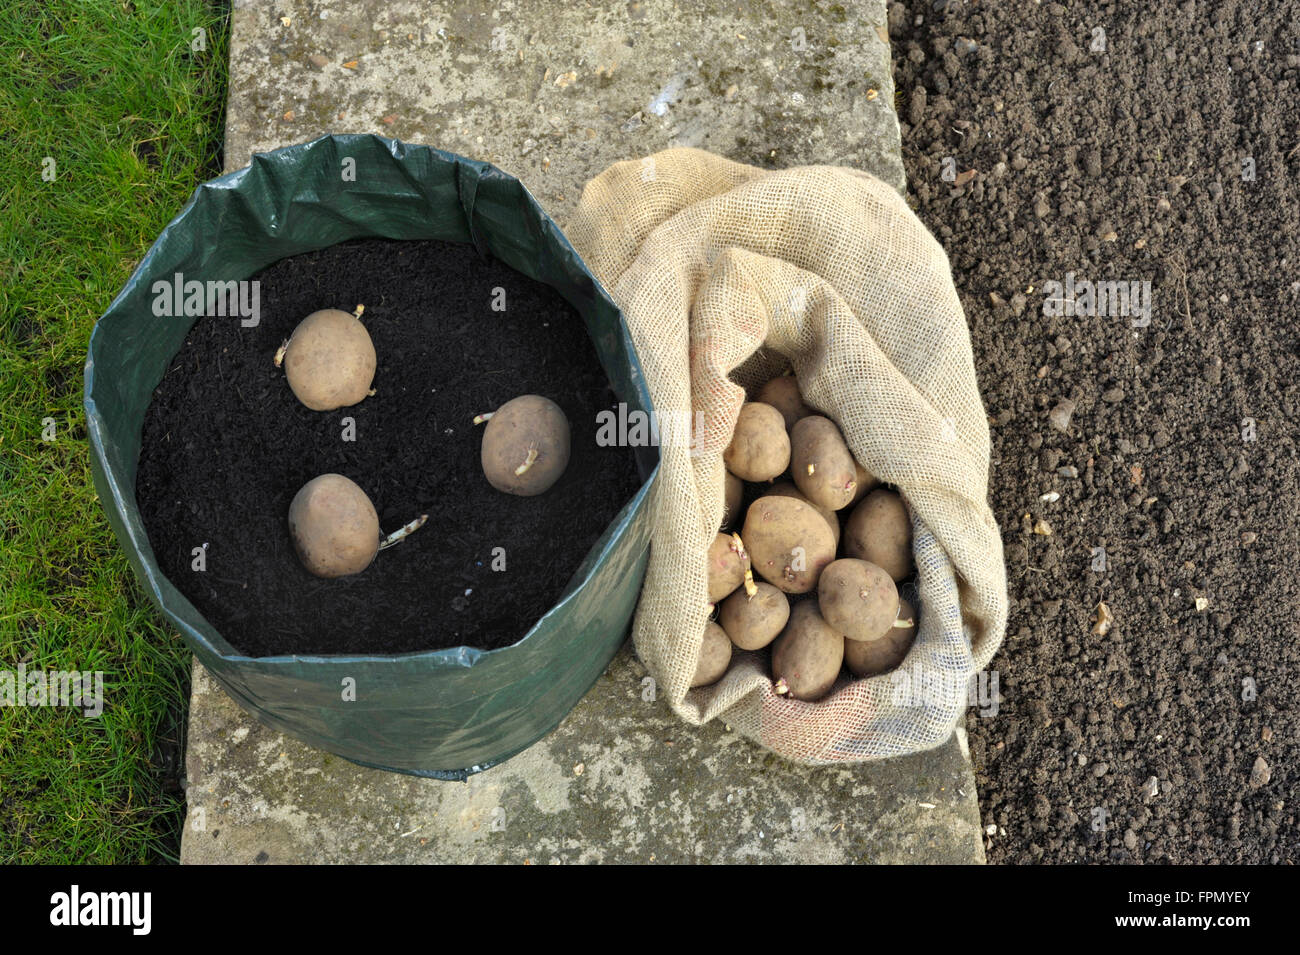 https://c8.alamy.com/comp/FPMYEY/planting-seed-potatoes-in-a-space-saving-growing-bag-or-patio-container-FPMYEY.jpg